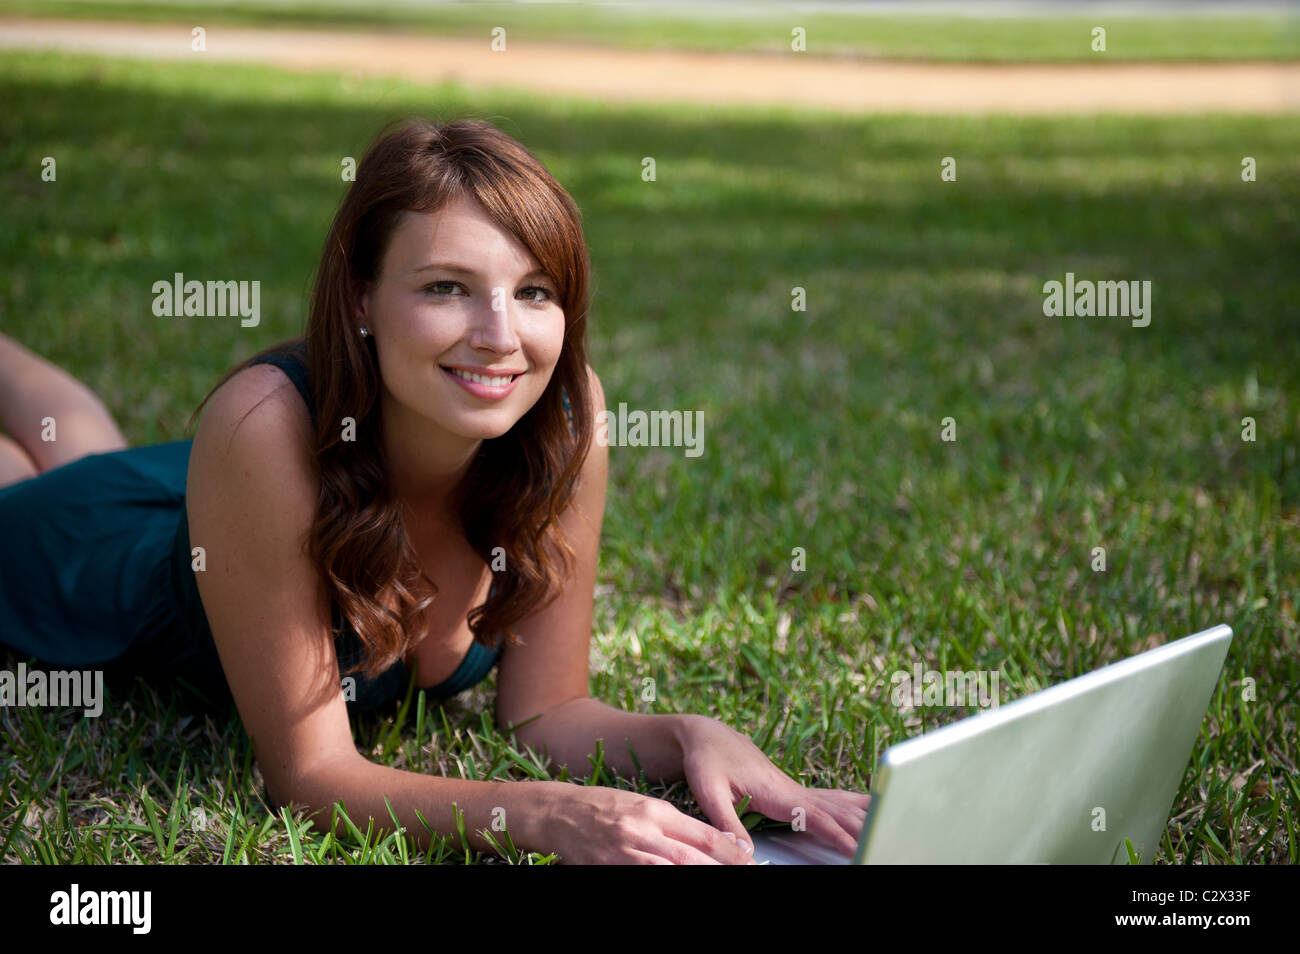 Beautiful young woman early 30s wearing dress lying on grass works on computer, looks at camera smiling. Stock Photo